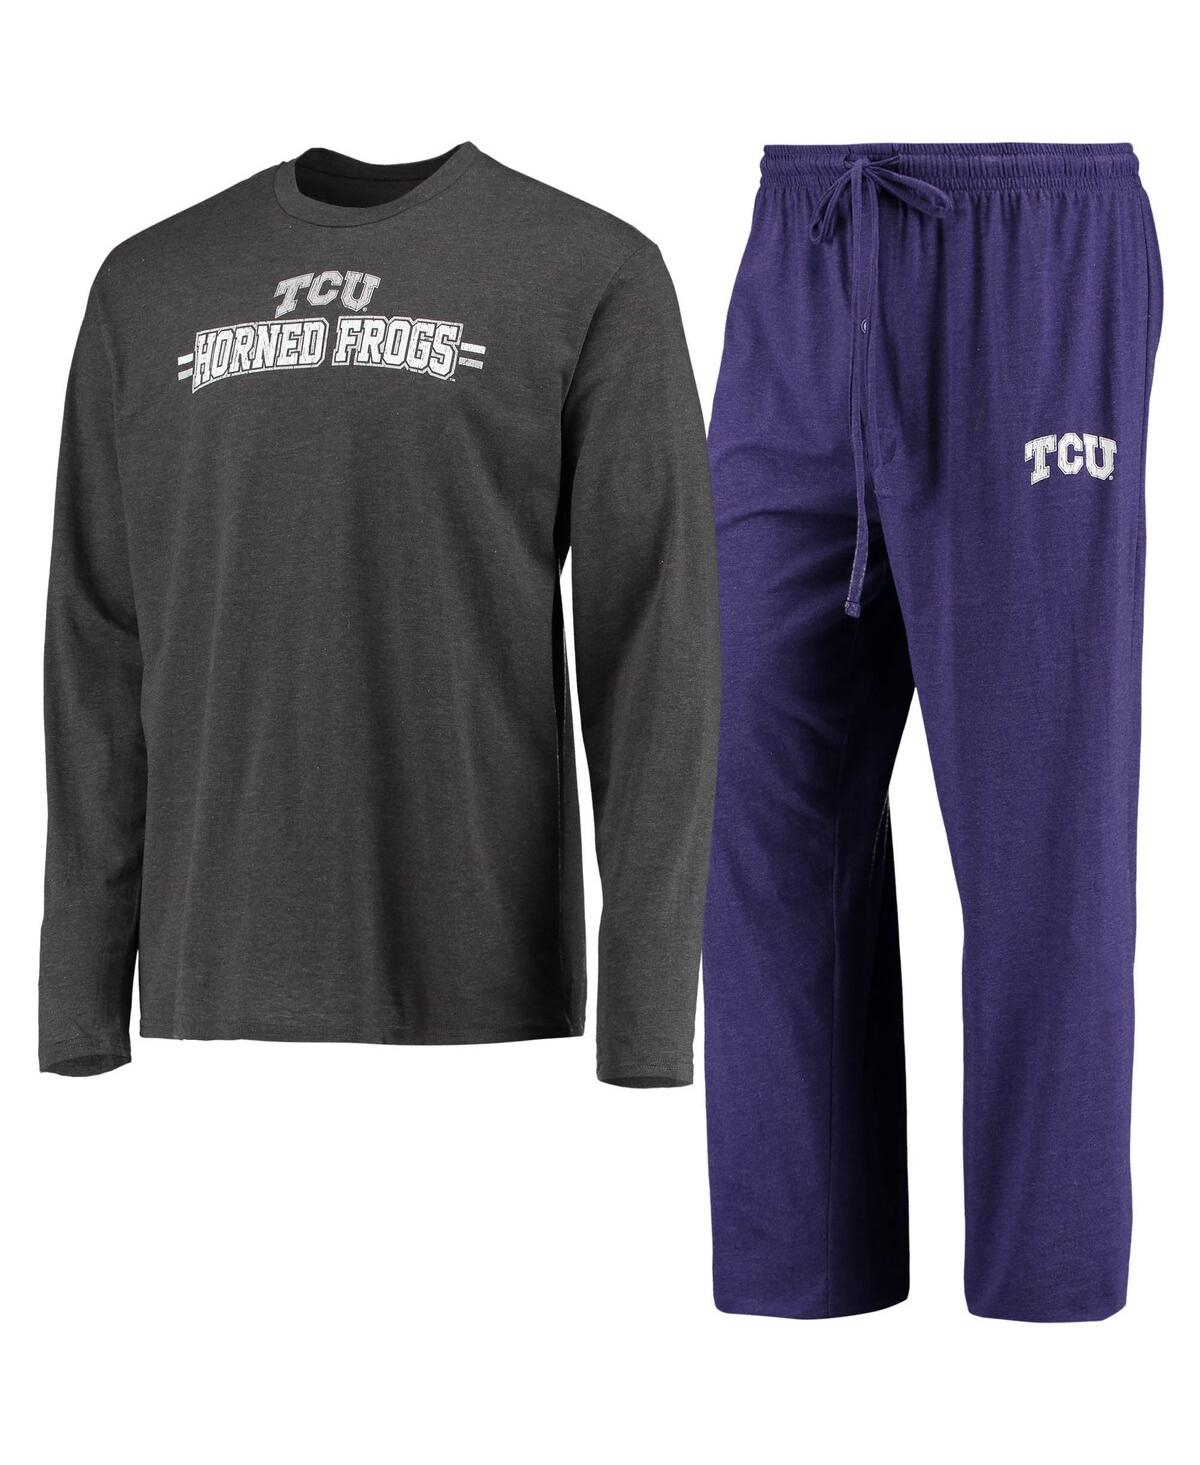 Men's Concepts Sport Purple, Heathered Charcoal Distressed Tcu Horned Frogs Meter Long Sleeve T-shirt and Pants Sleep Set - Purple, Heathered Charcoal